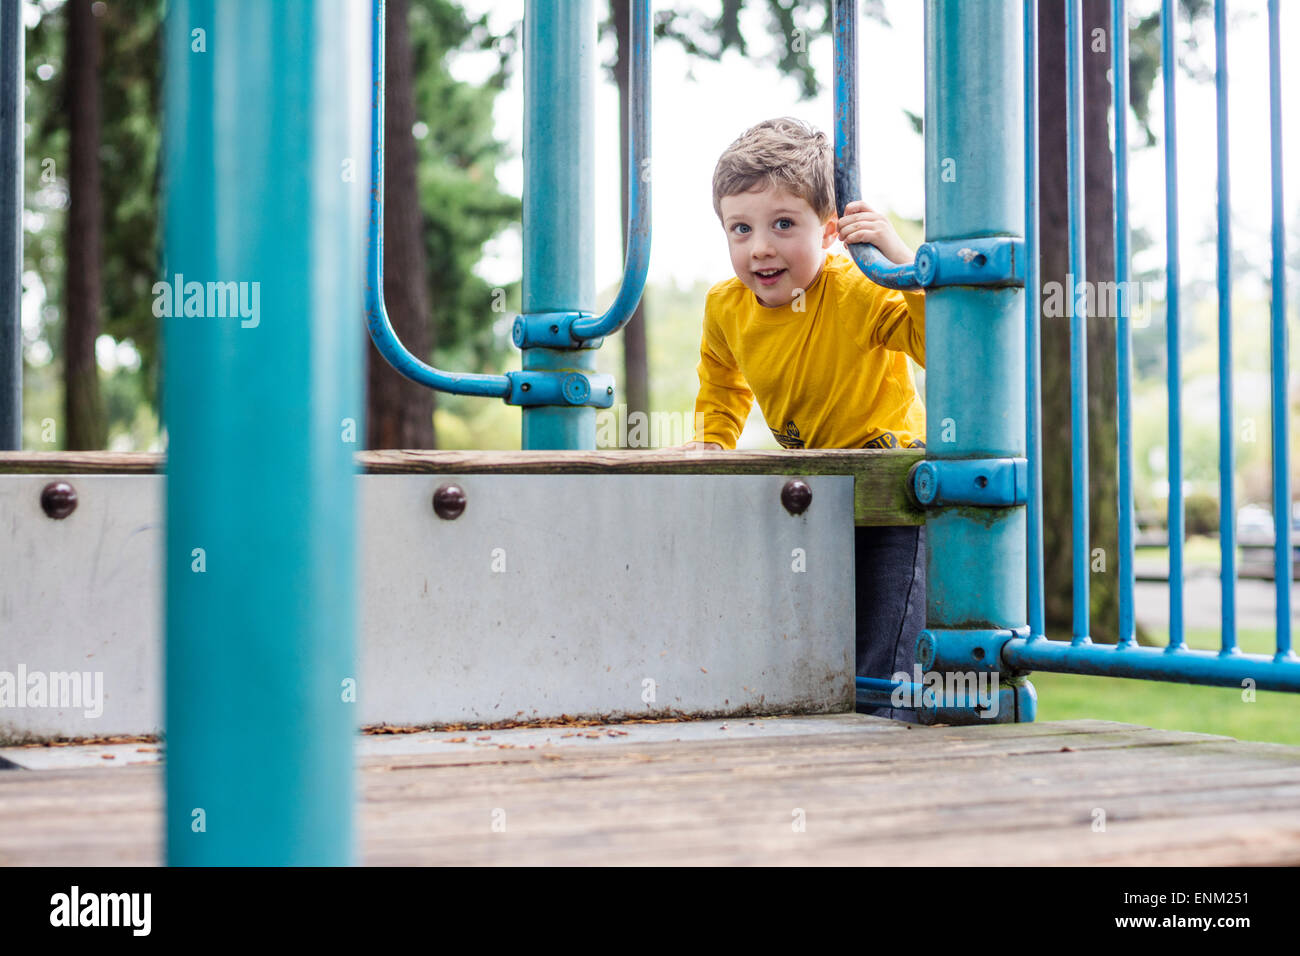 Toddler boy successfully climbs to top of play structure at playground in Portland, Oregon. Stock Photo